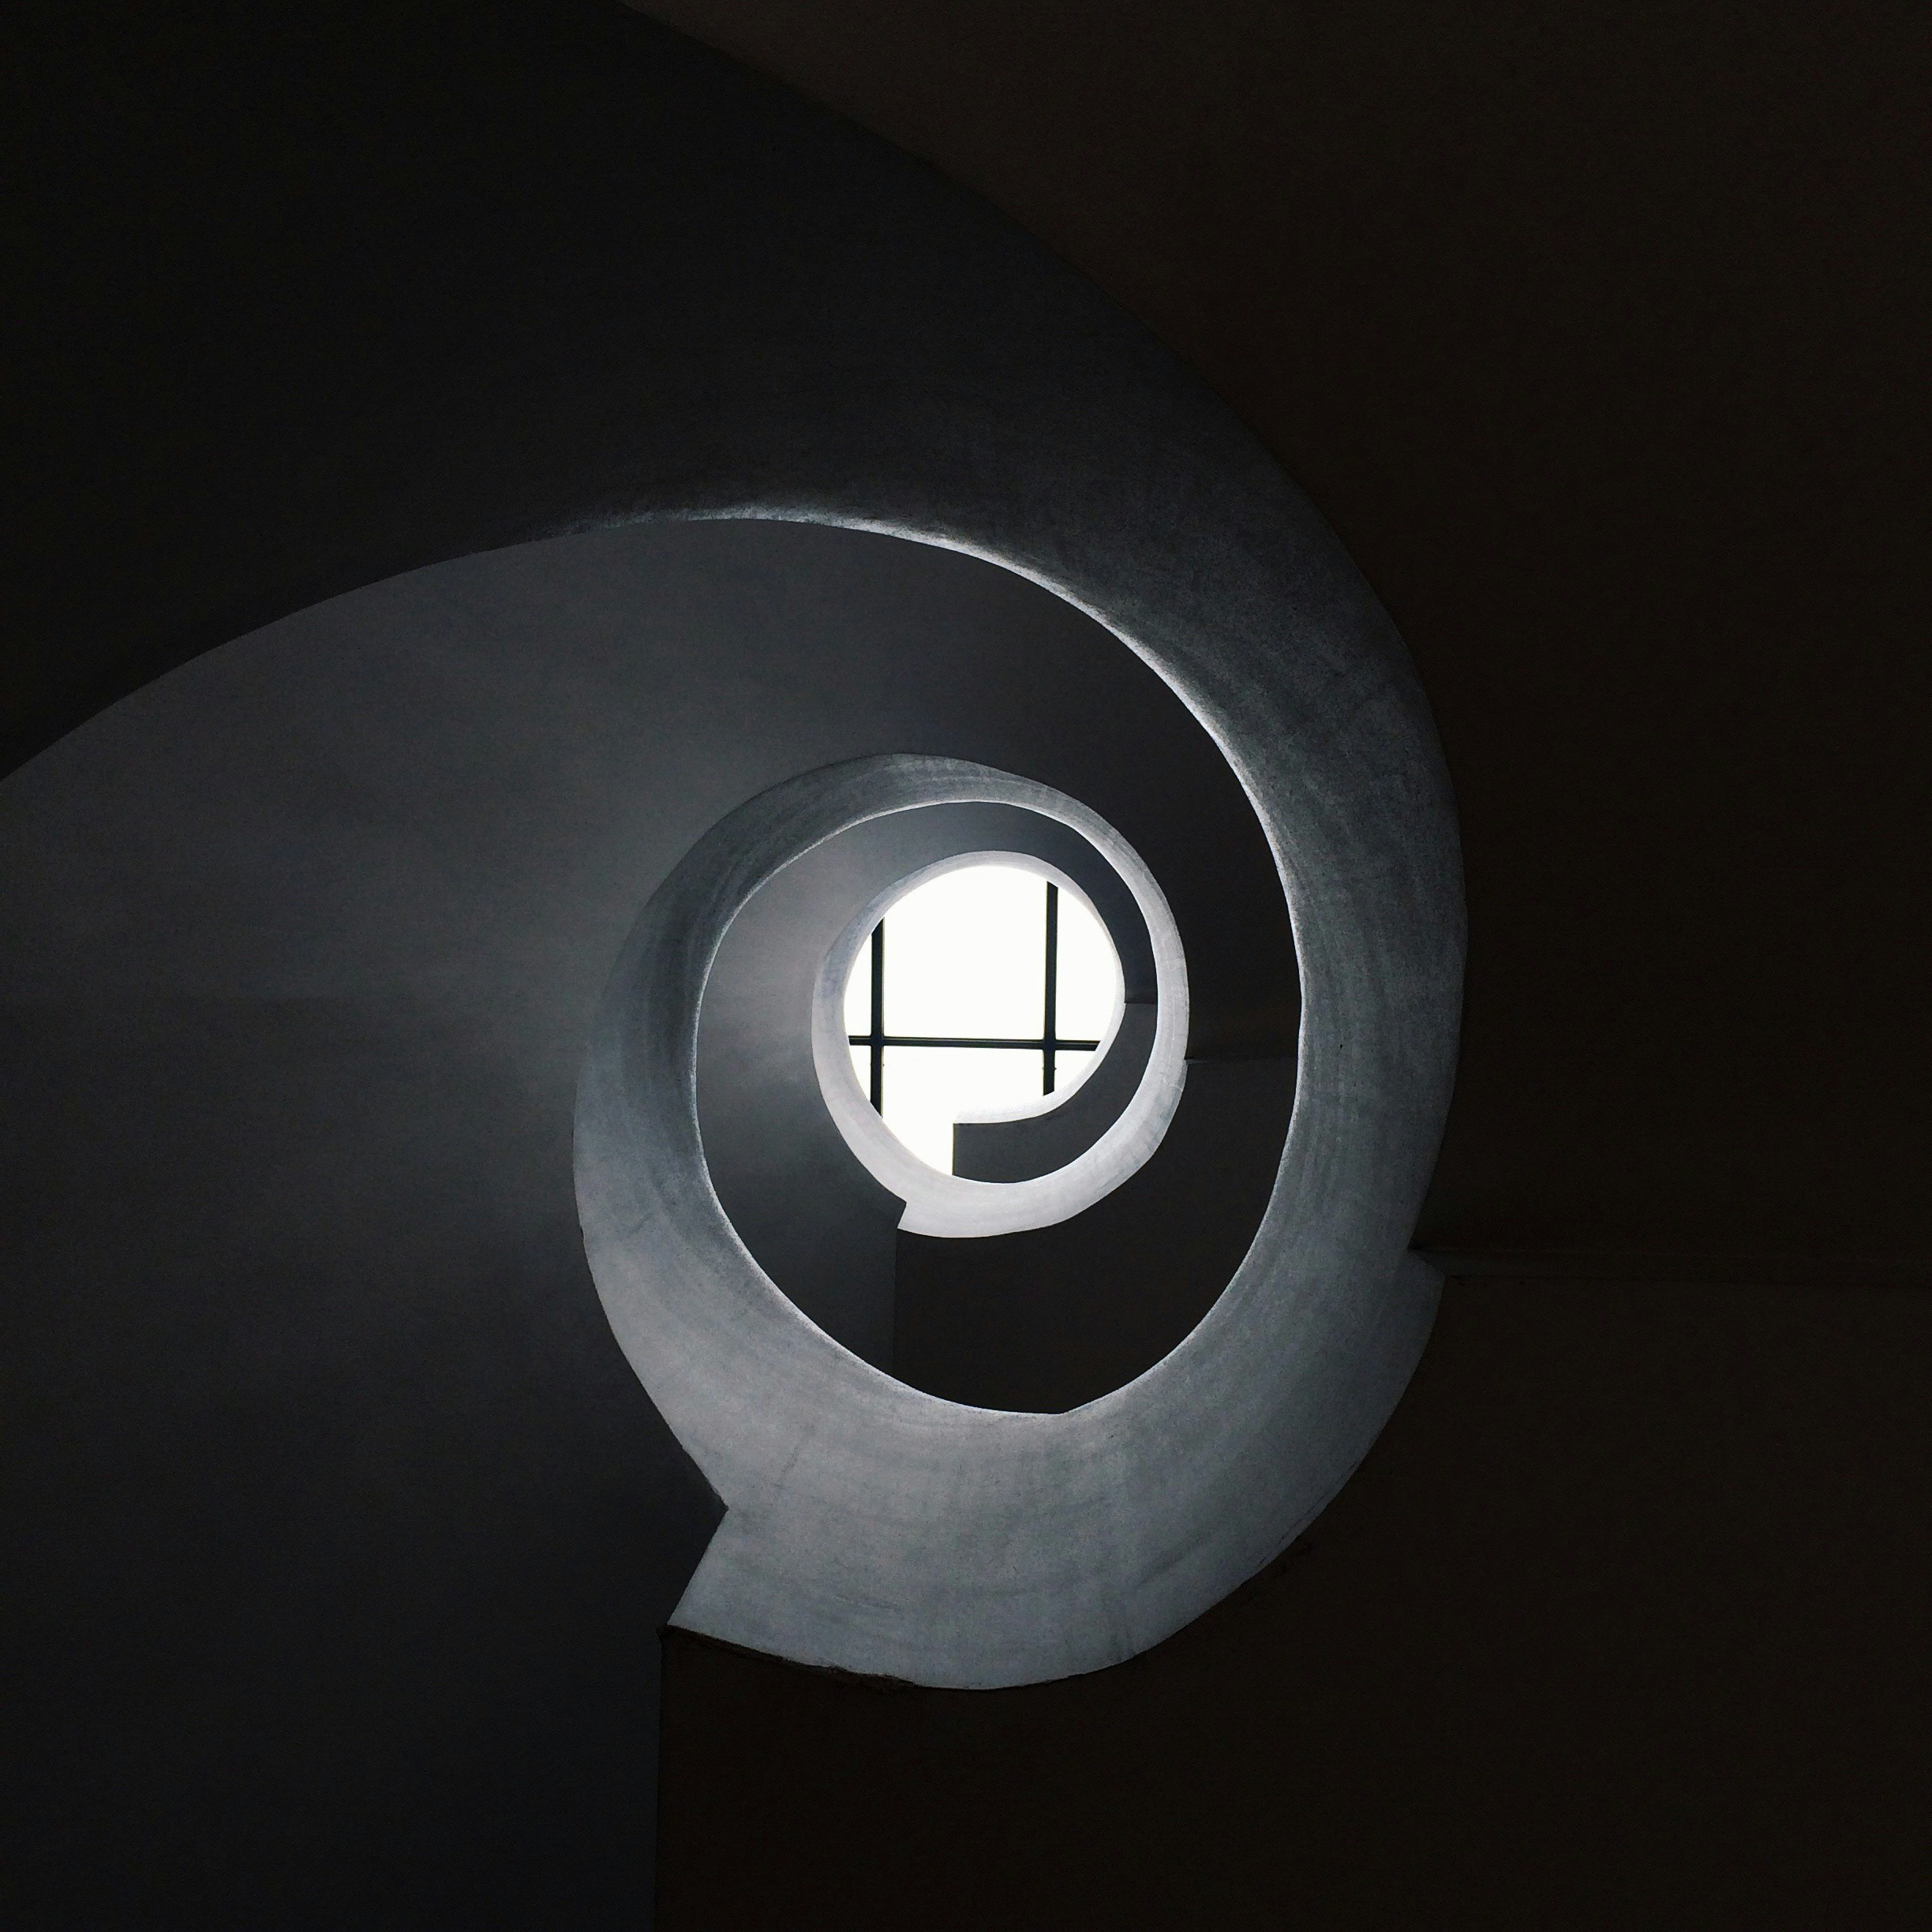 great photo recipe,how to photograph dark spiral well; bottom view of concrete spiral stair